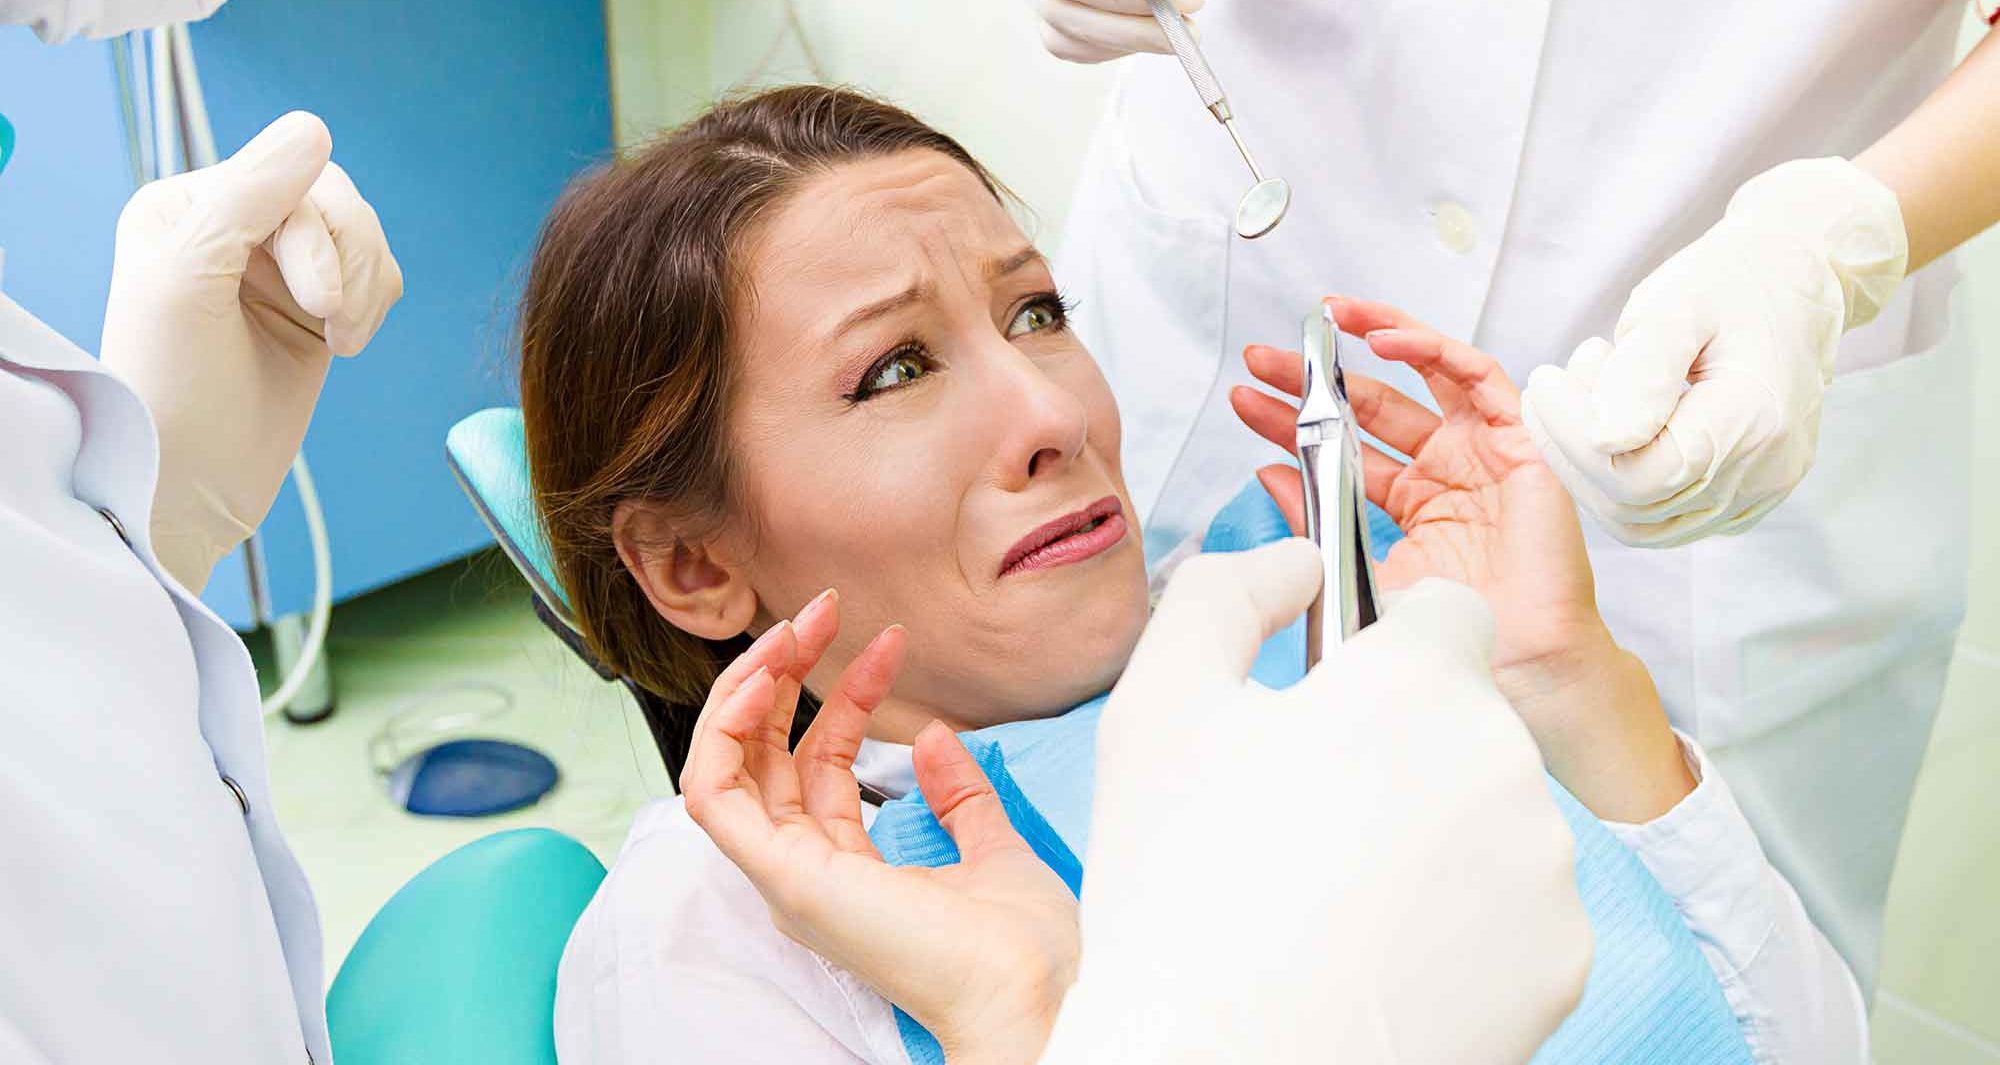 Dental Overtreatment, 2 Ways to Protect Yourself